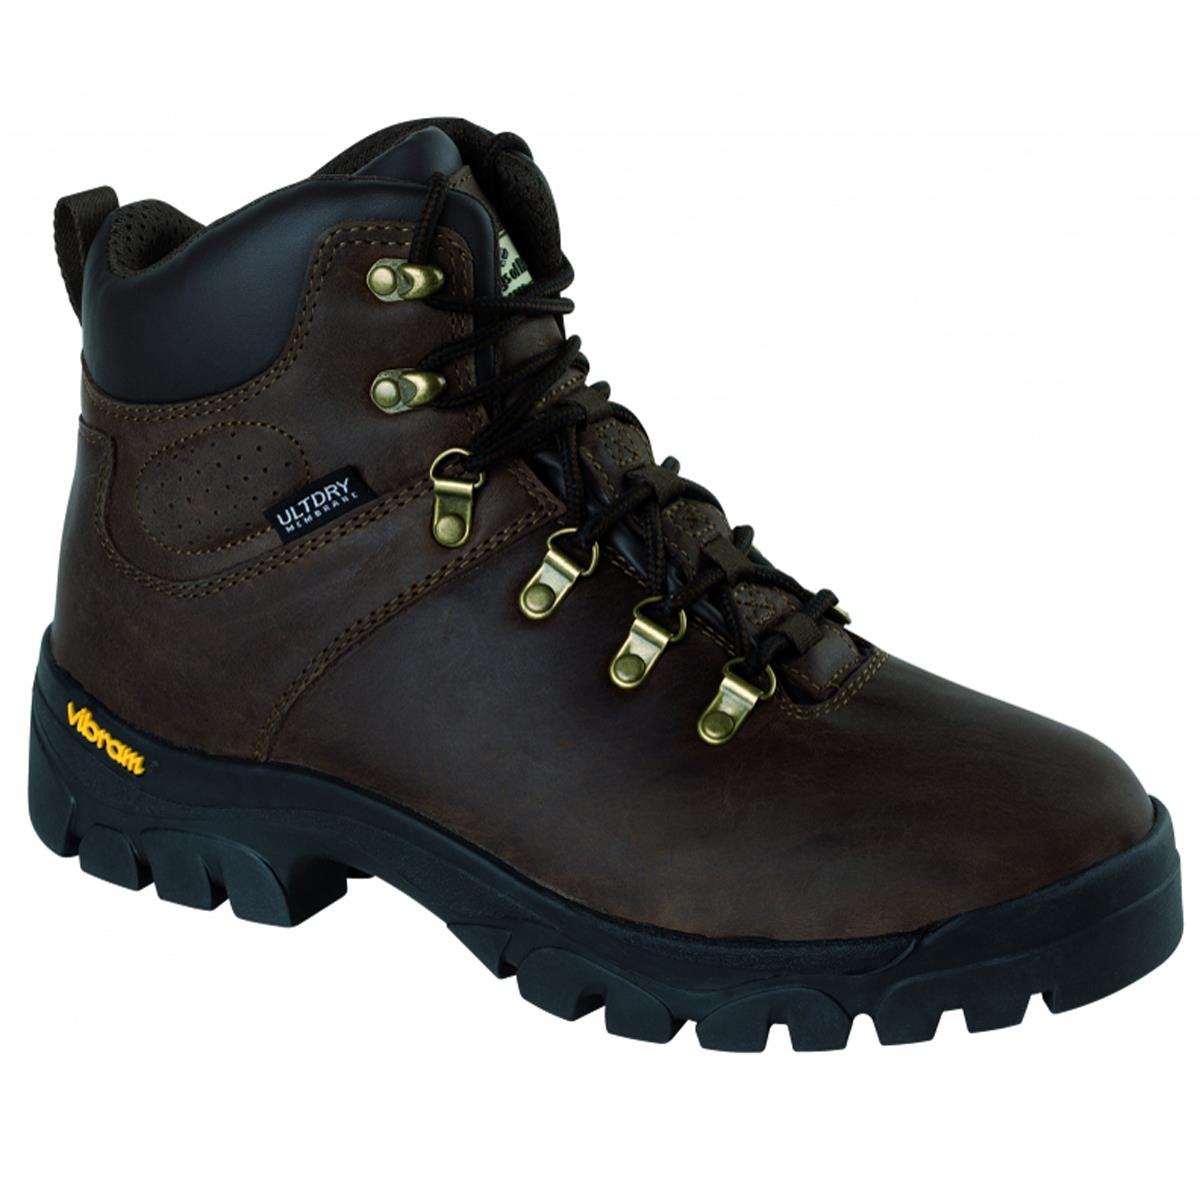 Hoggs Of Fife Munro Classic Hiking Boot Questions & Answers